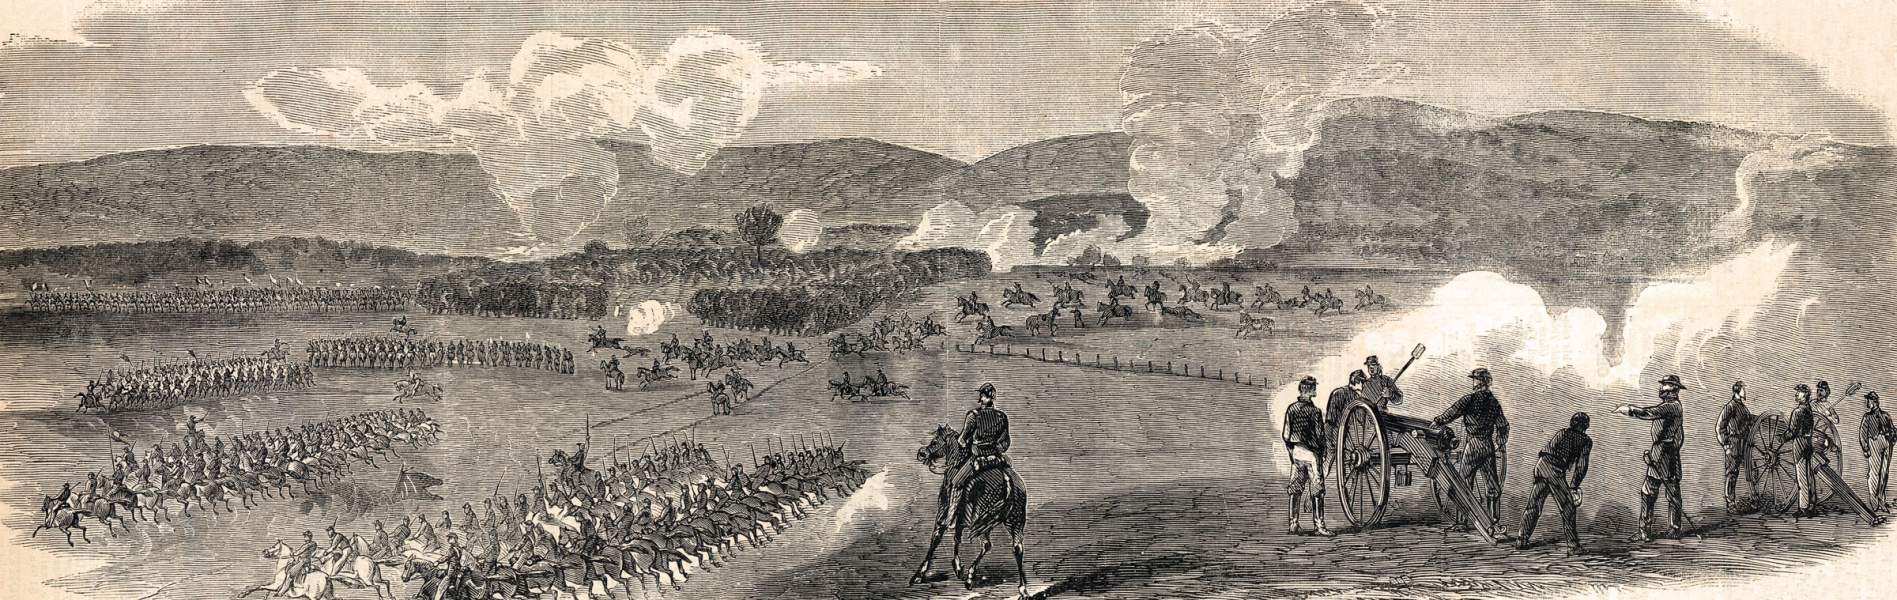 Cavalry skirmishing near Upperville, Virginia, June 21, 1863, artist's impression, zoomable image